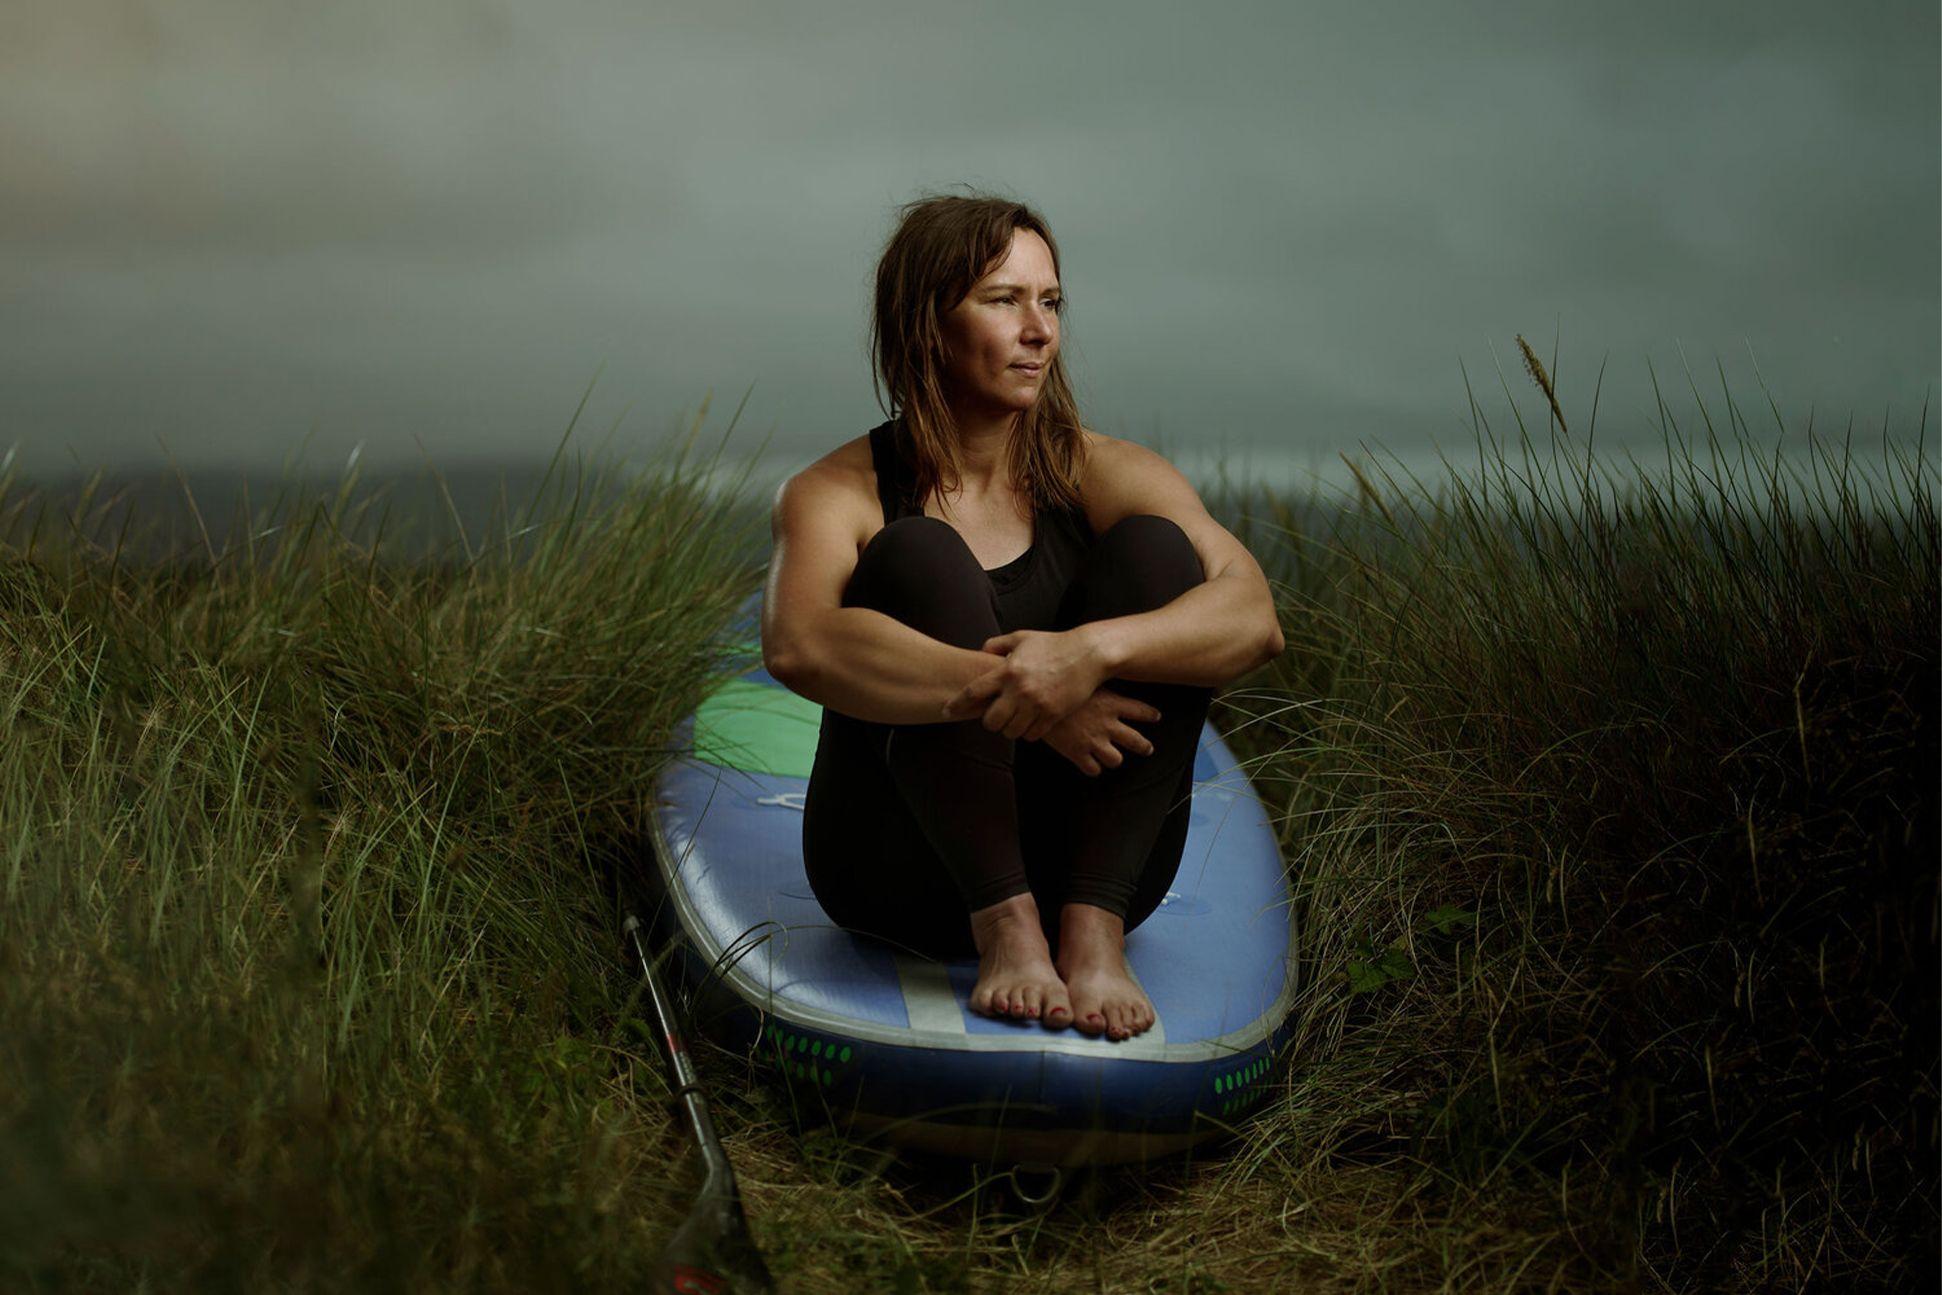 Person sitting on paddle board in grass 